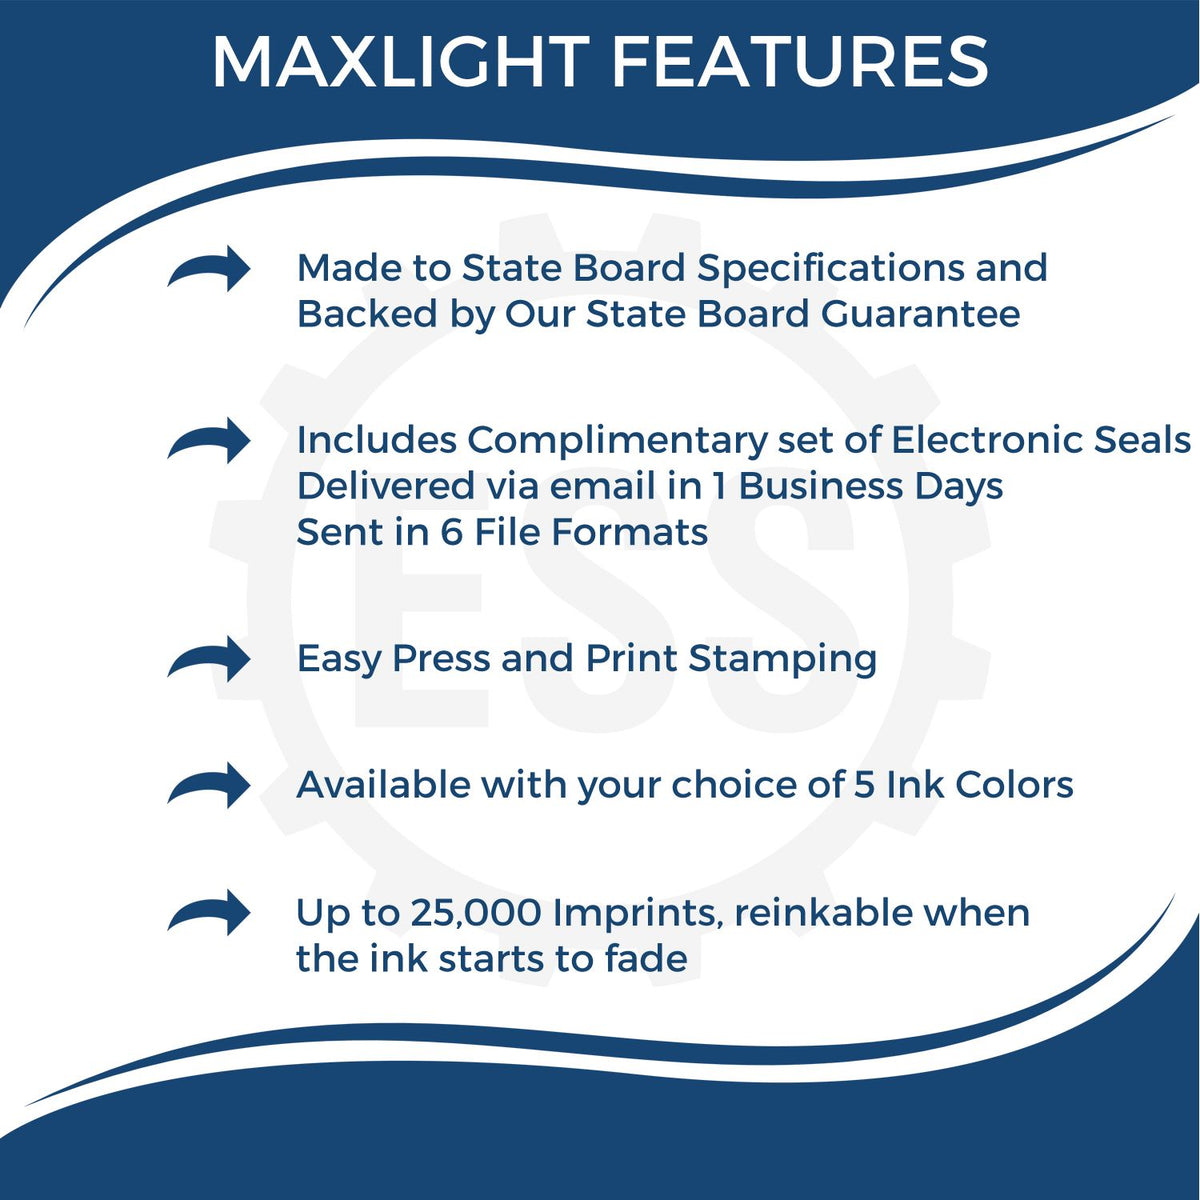 A picture of an infographic highlighting the selling points for the Premium MaxLight Pre-Inked Vermont Engineering Stamp